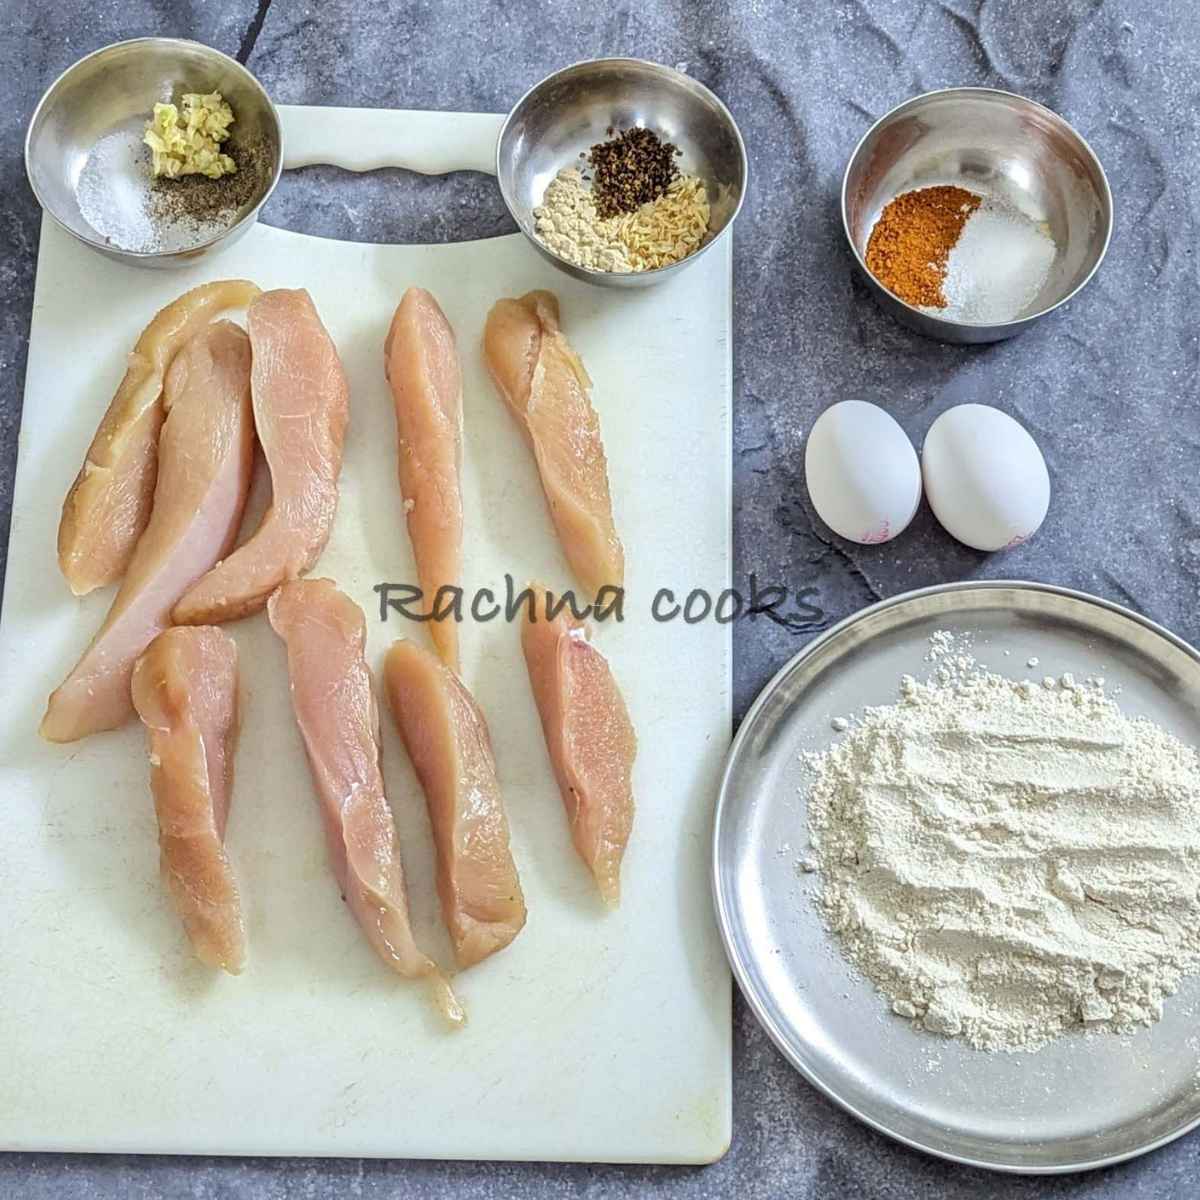 The ingredients for Buffalo chicken tenders laid out: chicken tenders, seasonings for chicken and breading, eggs and flour.